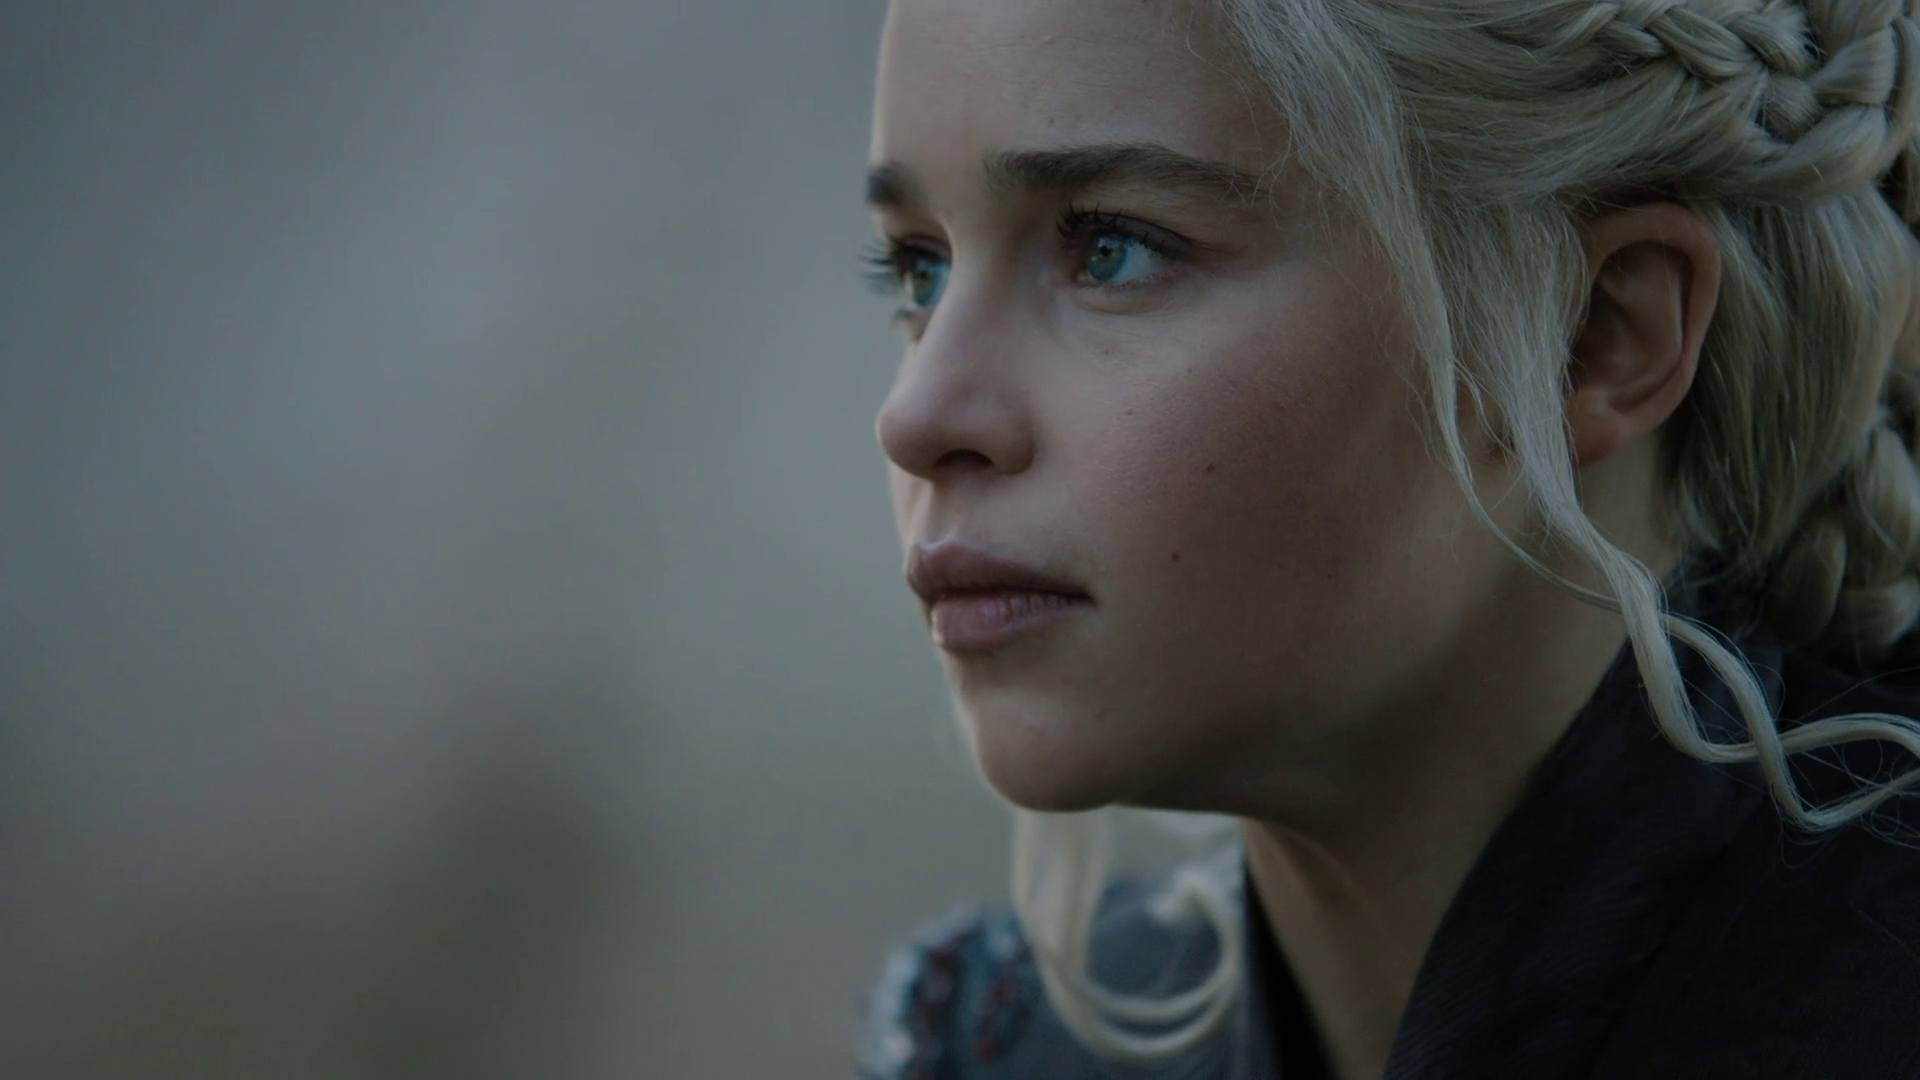 game of thrones hd wallpapers 1080p